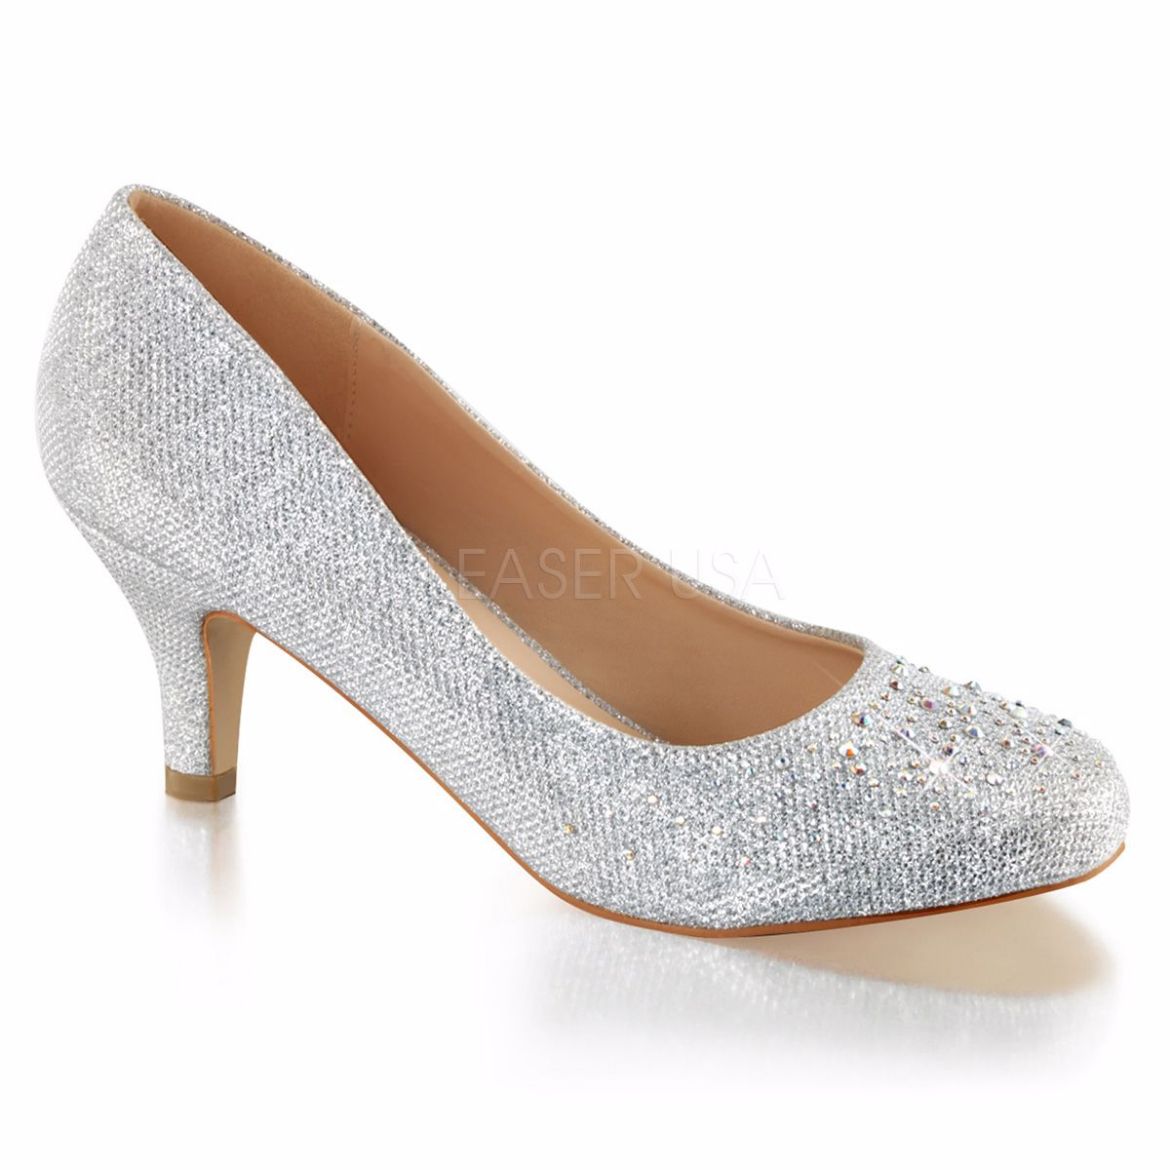 Product image of Fabulicious DORIS-06 Silver Glitter Mesh Fabric 2 1/2 inch (6.4 cm) Kitten Heel Pump Embellished With Rhinestones Glitter Court Pump Shoes